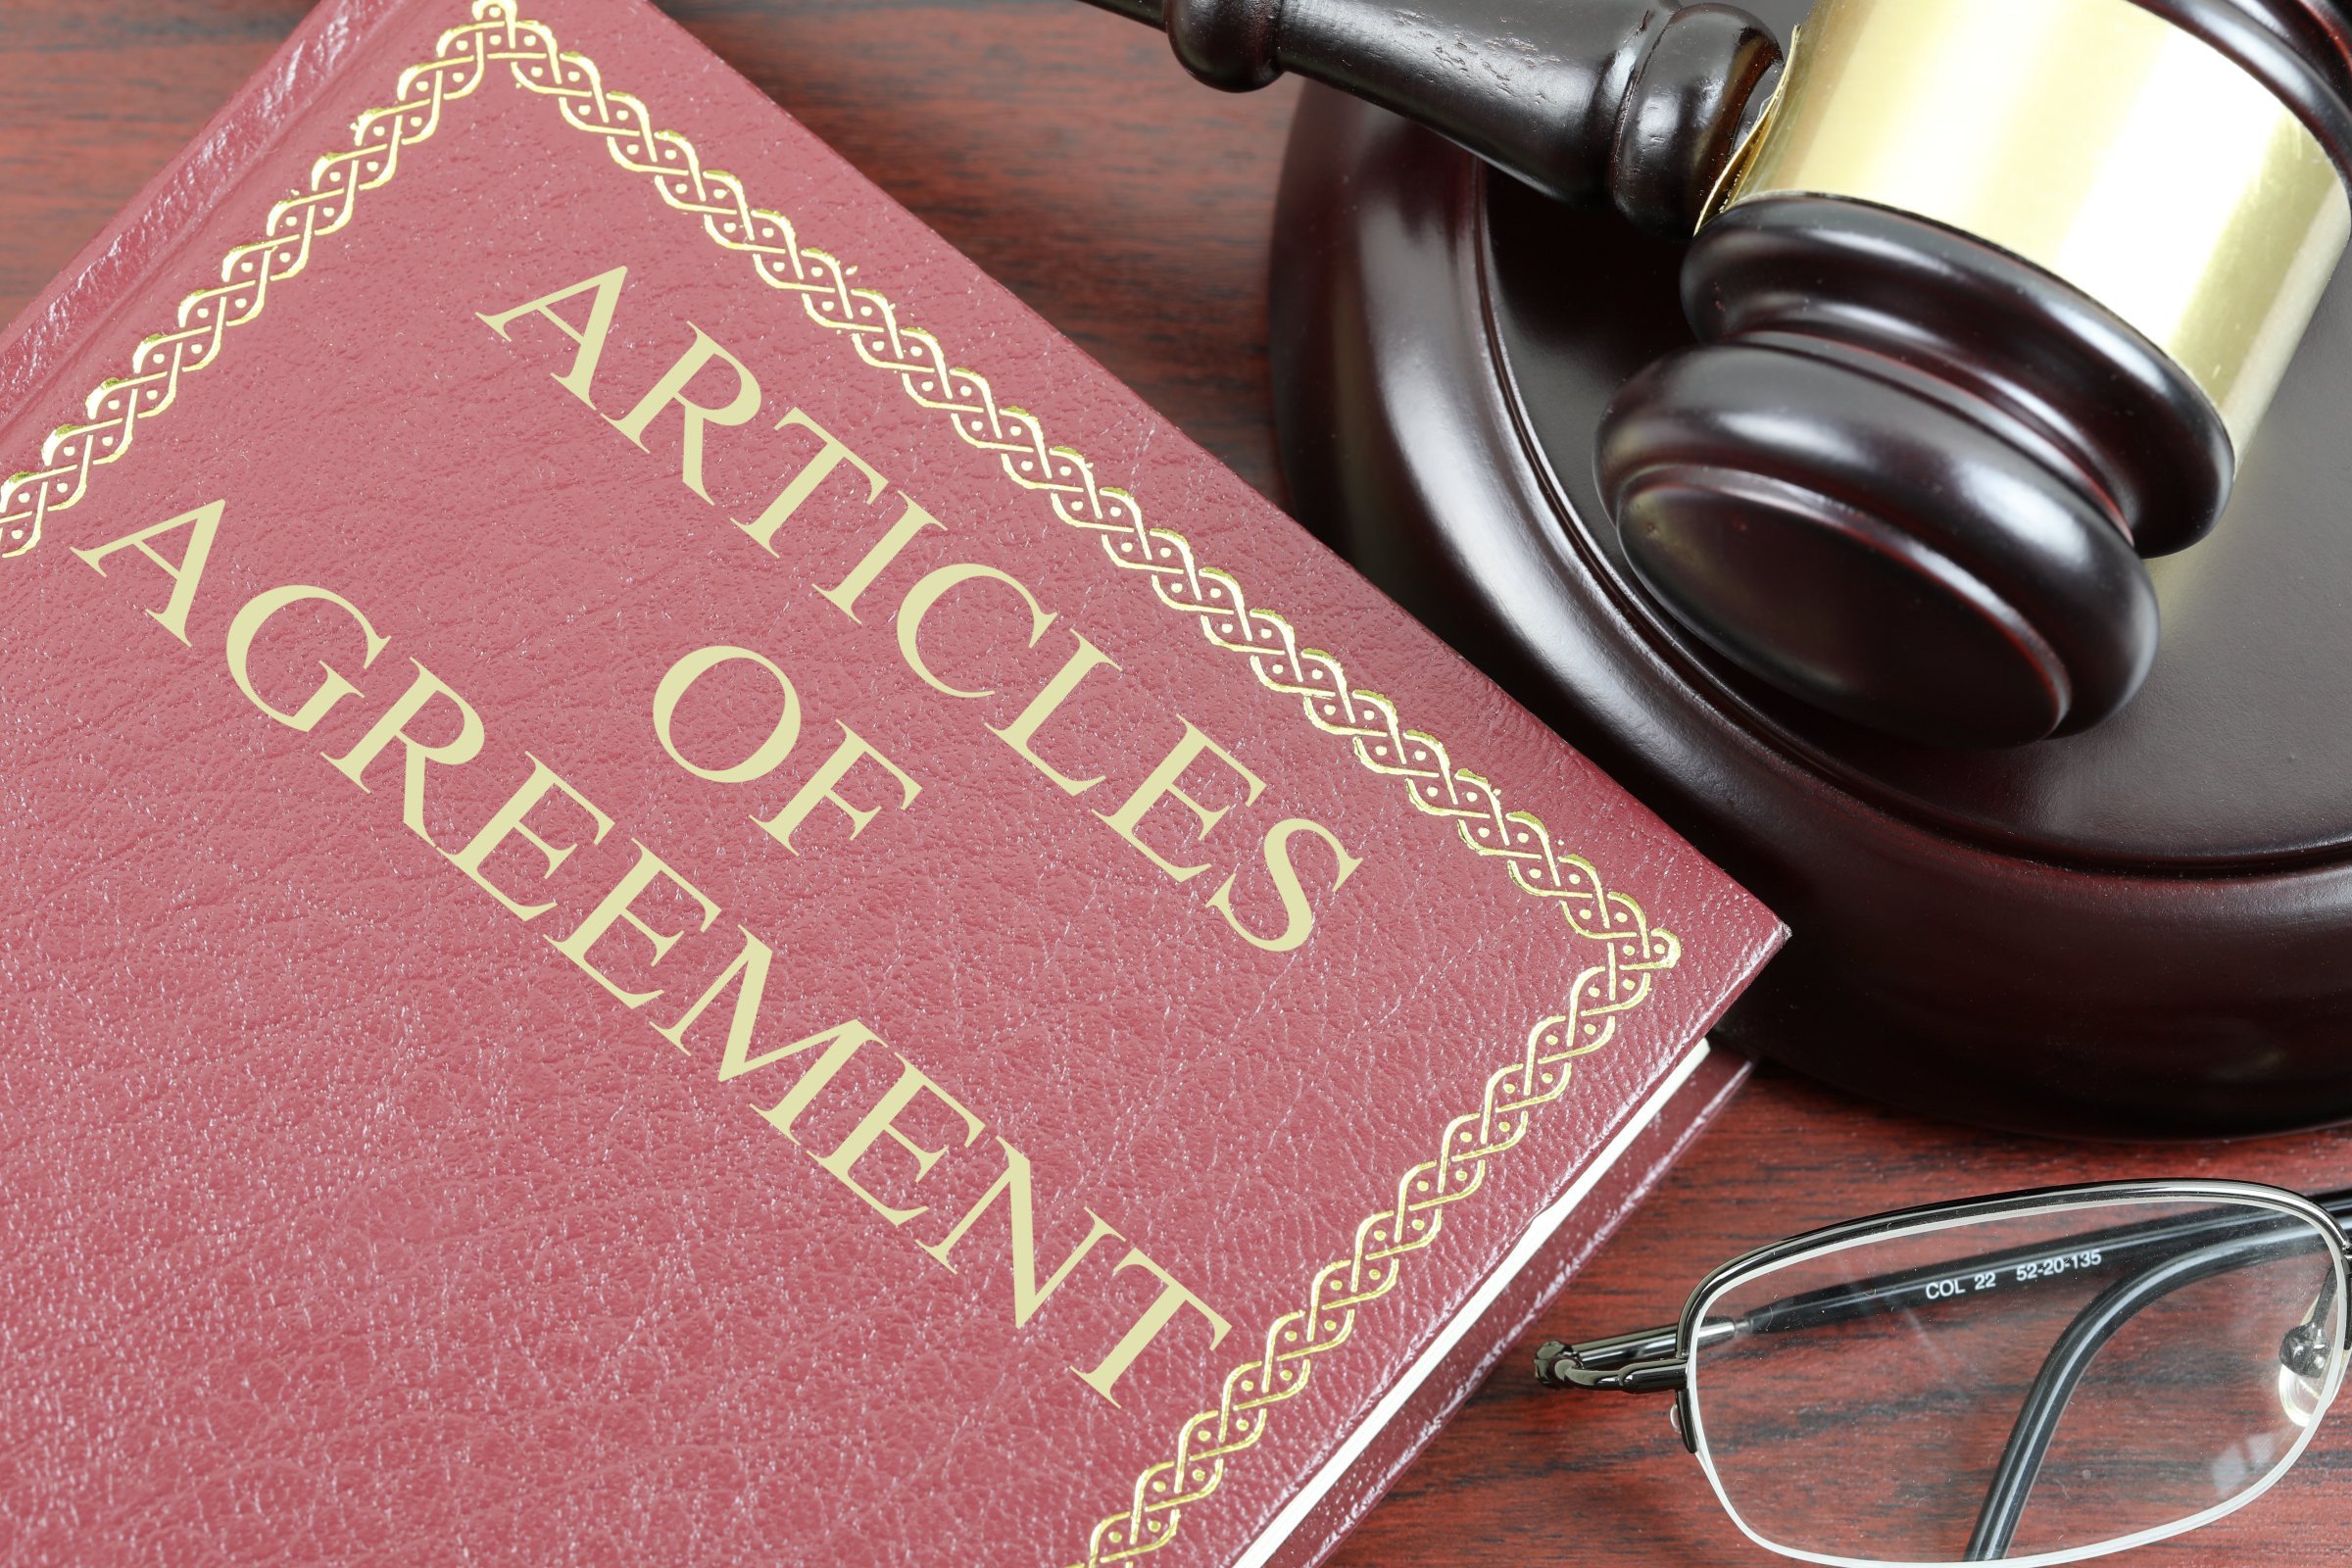 articles of agreement